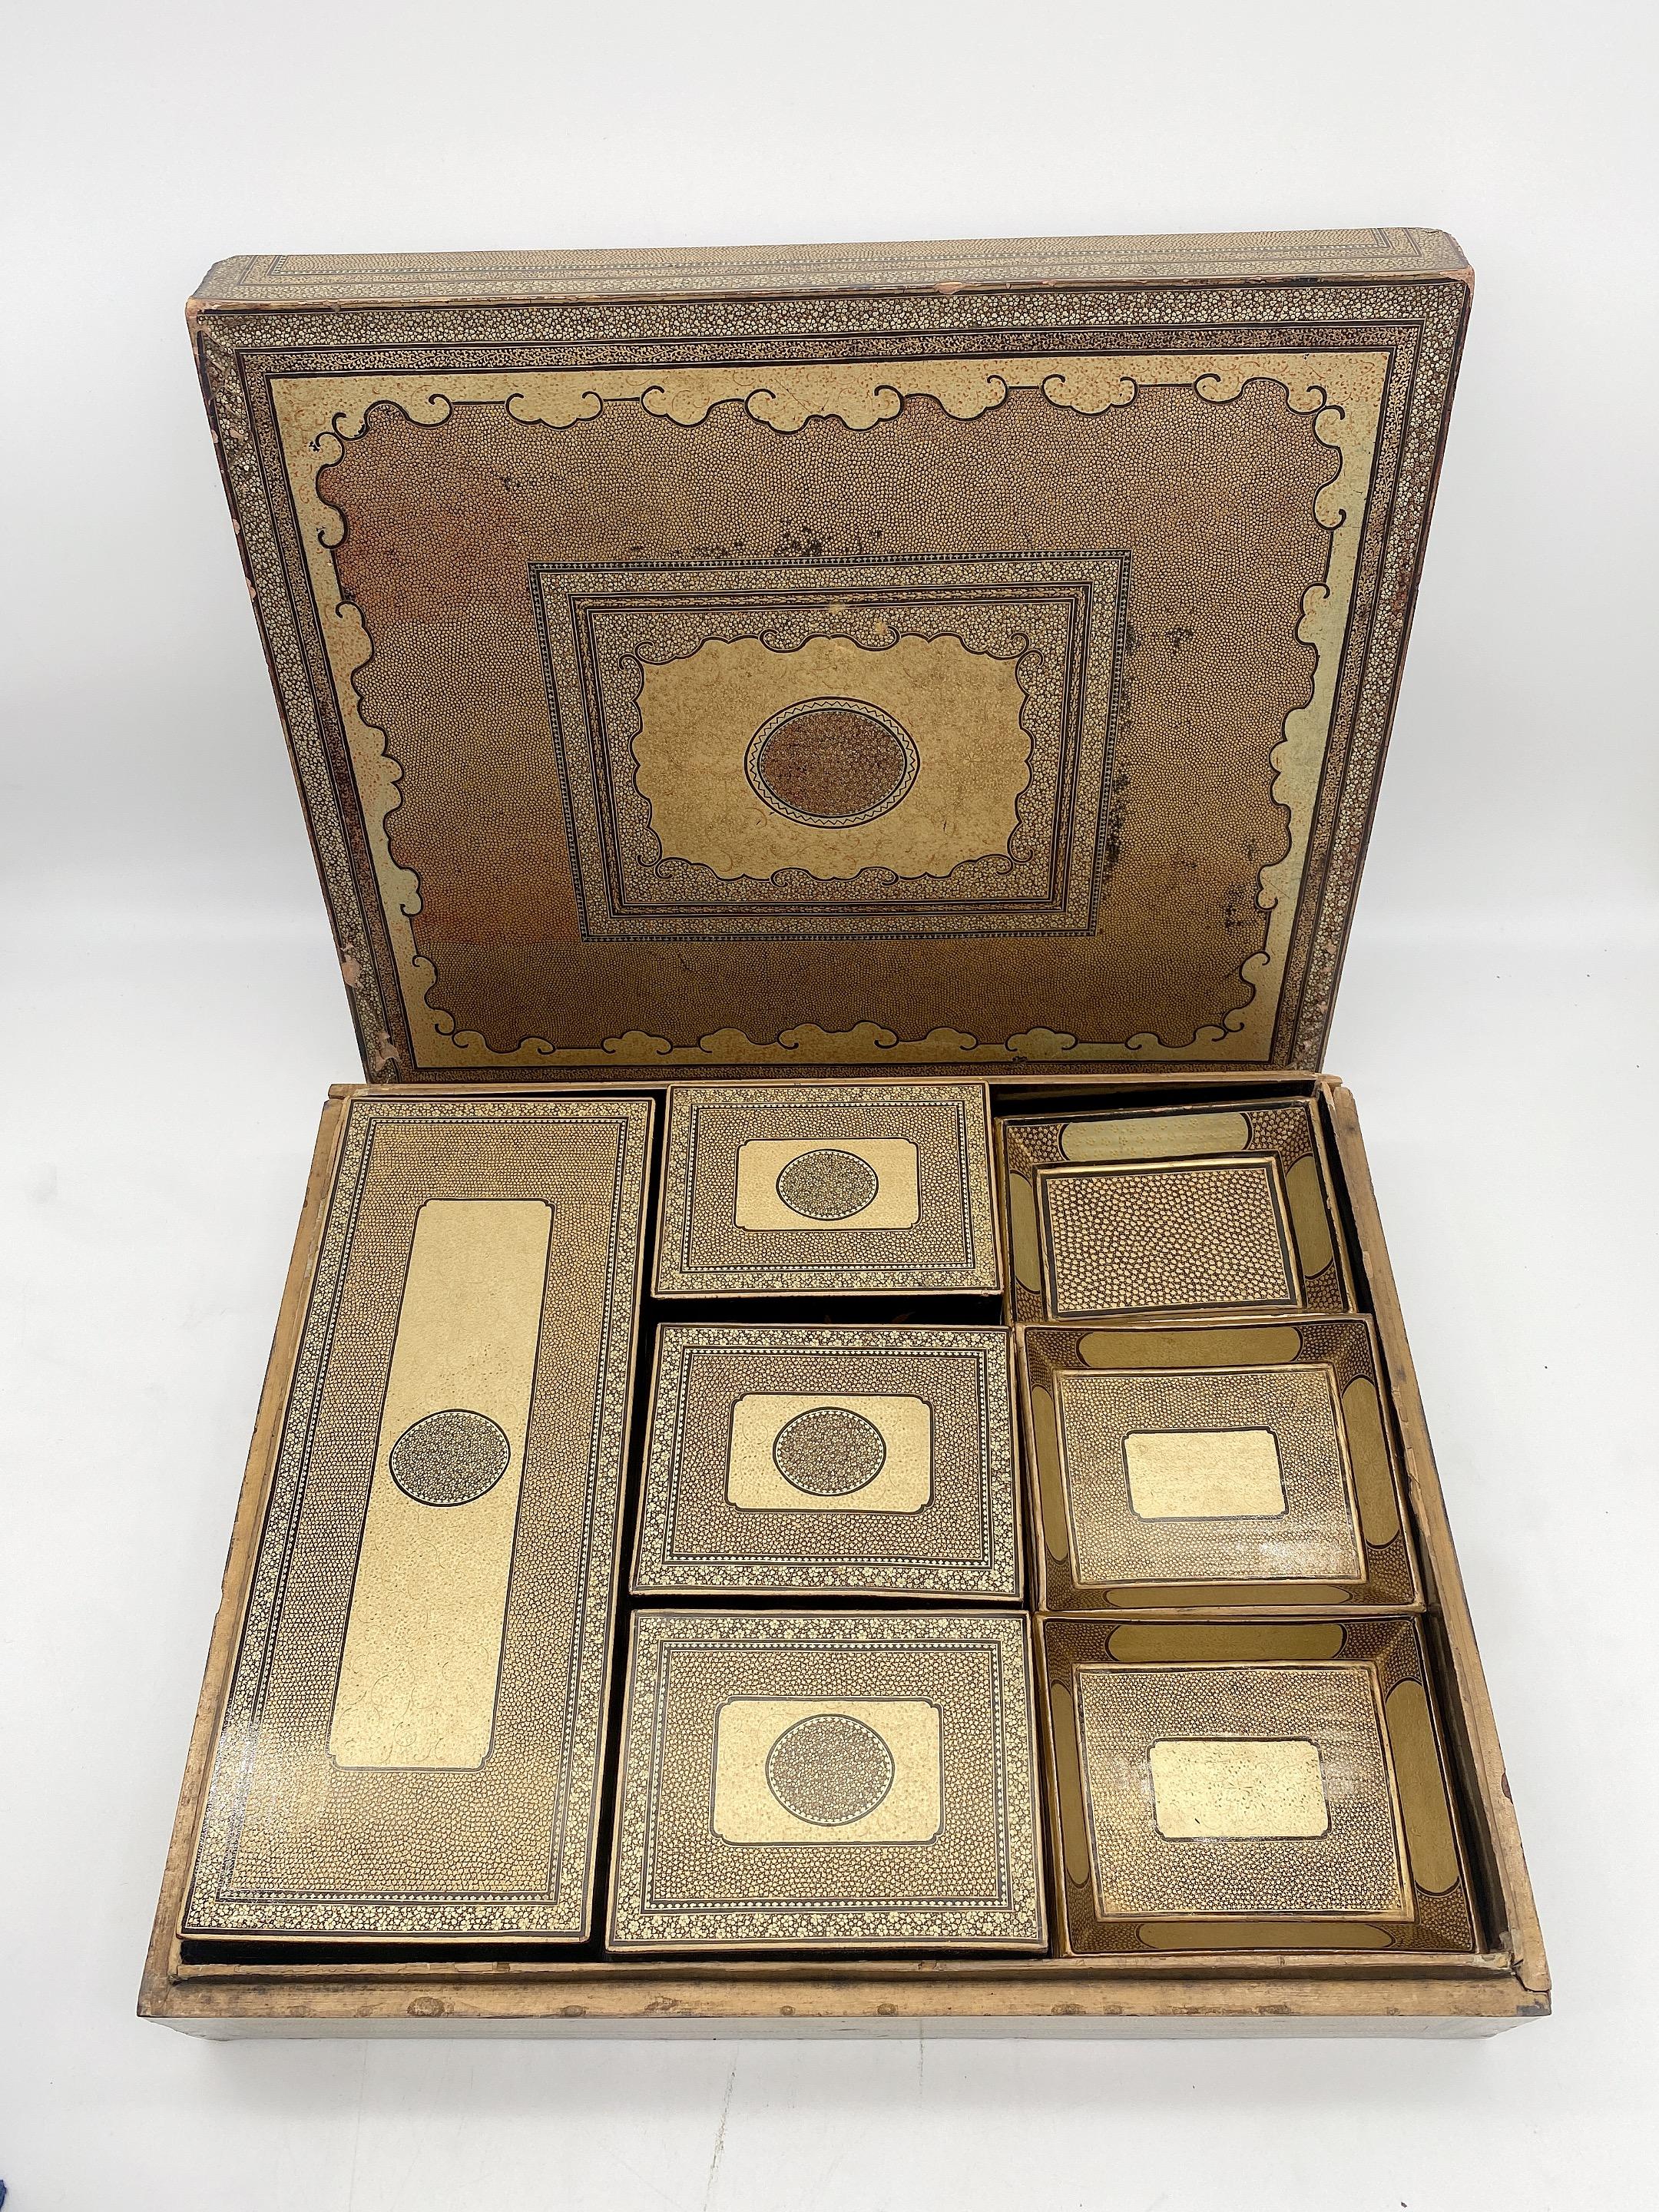 Very rare complete circa early 19 century Chinese gilt lacquer gambling storage box trays and dishes. A great and complete gold and black lacquered gaming set., one big box, 3 small box, total 12 small trays dishes, one tray missing one edge, see